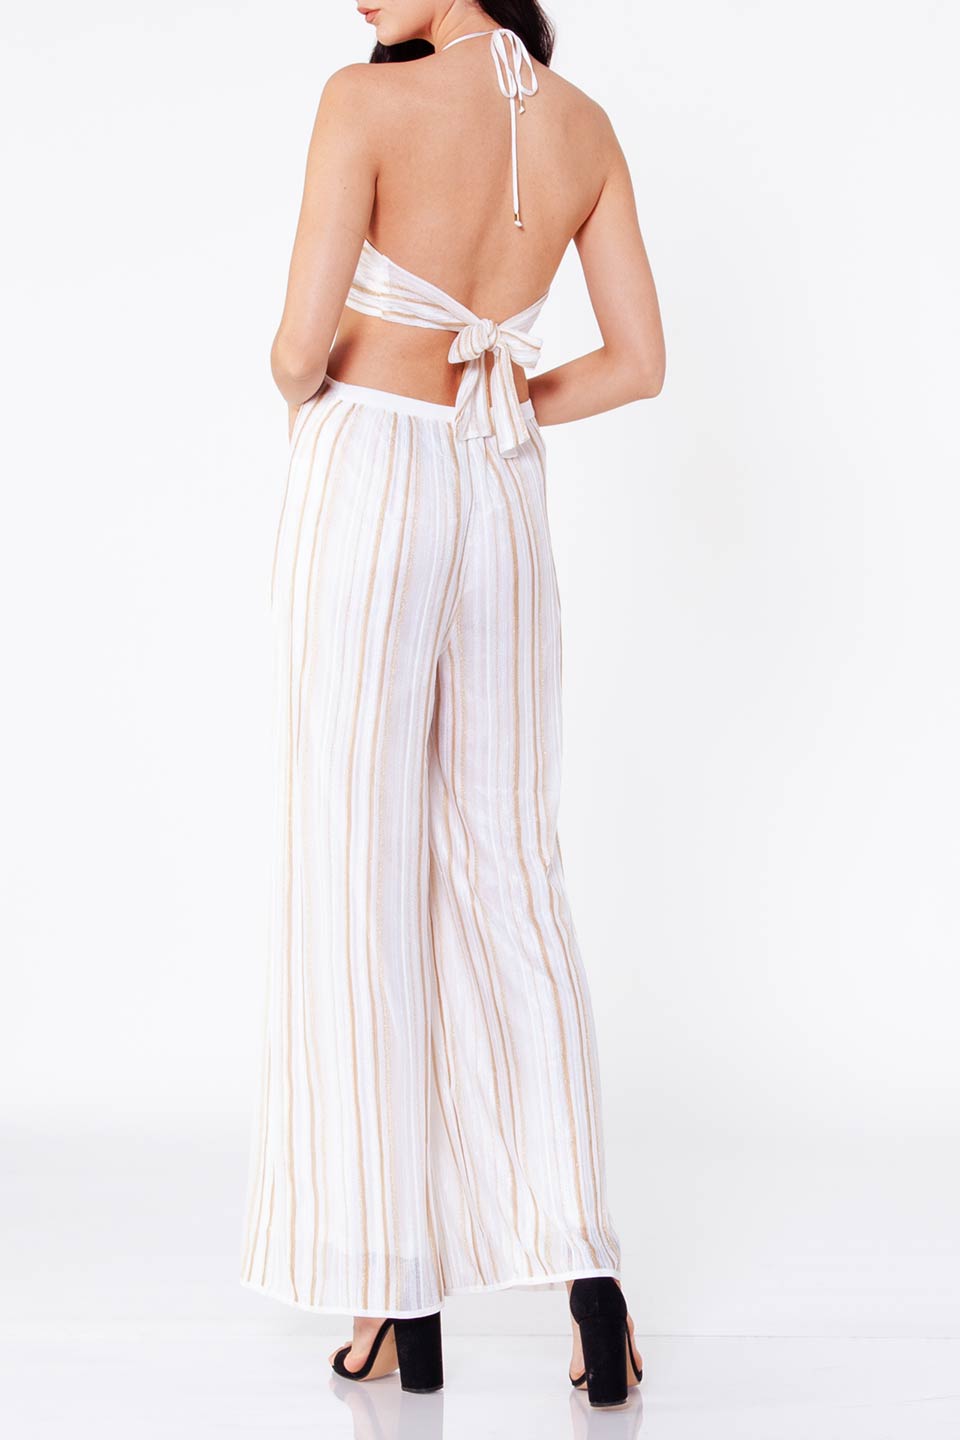 Thumbnail for Product gallery 5, kukhareva london leonnie jumpsuit white gold back side